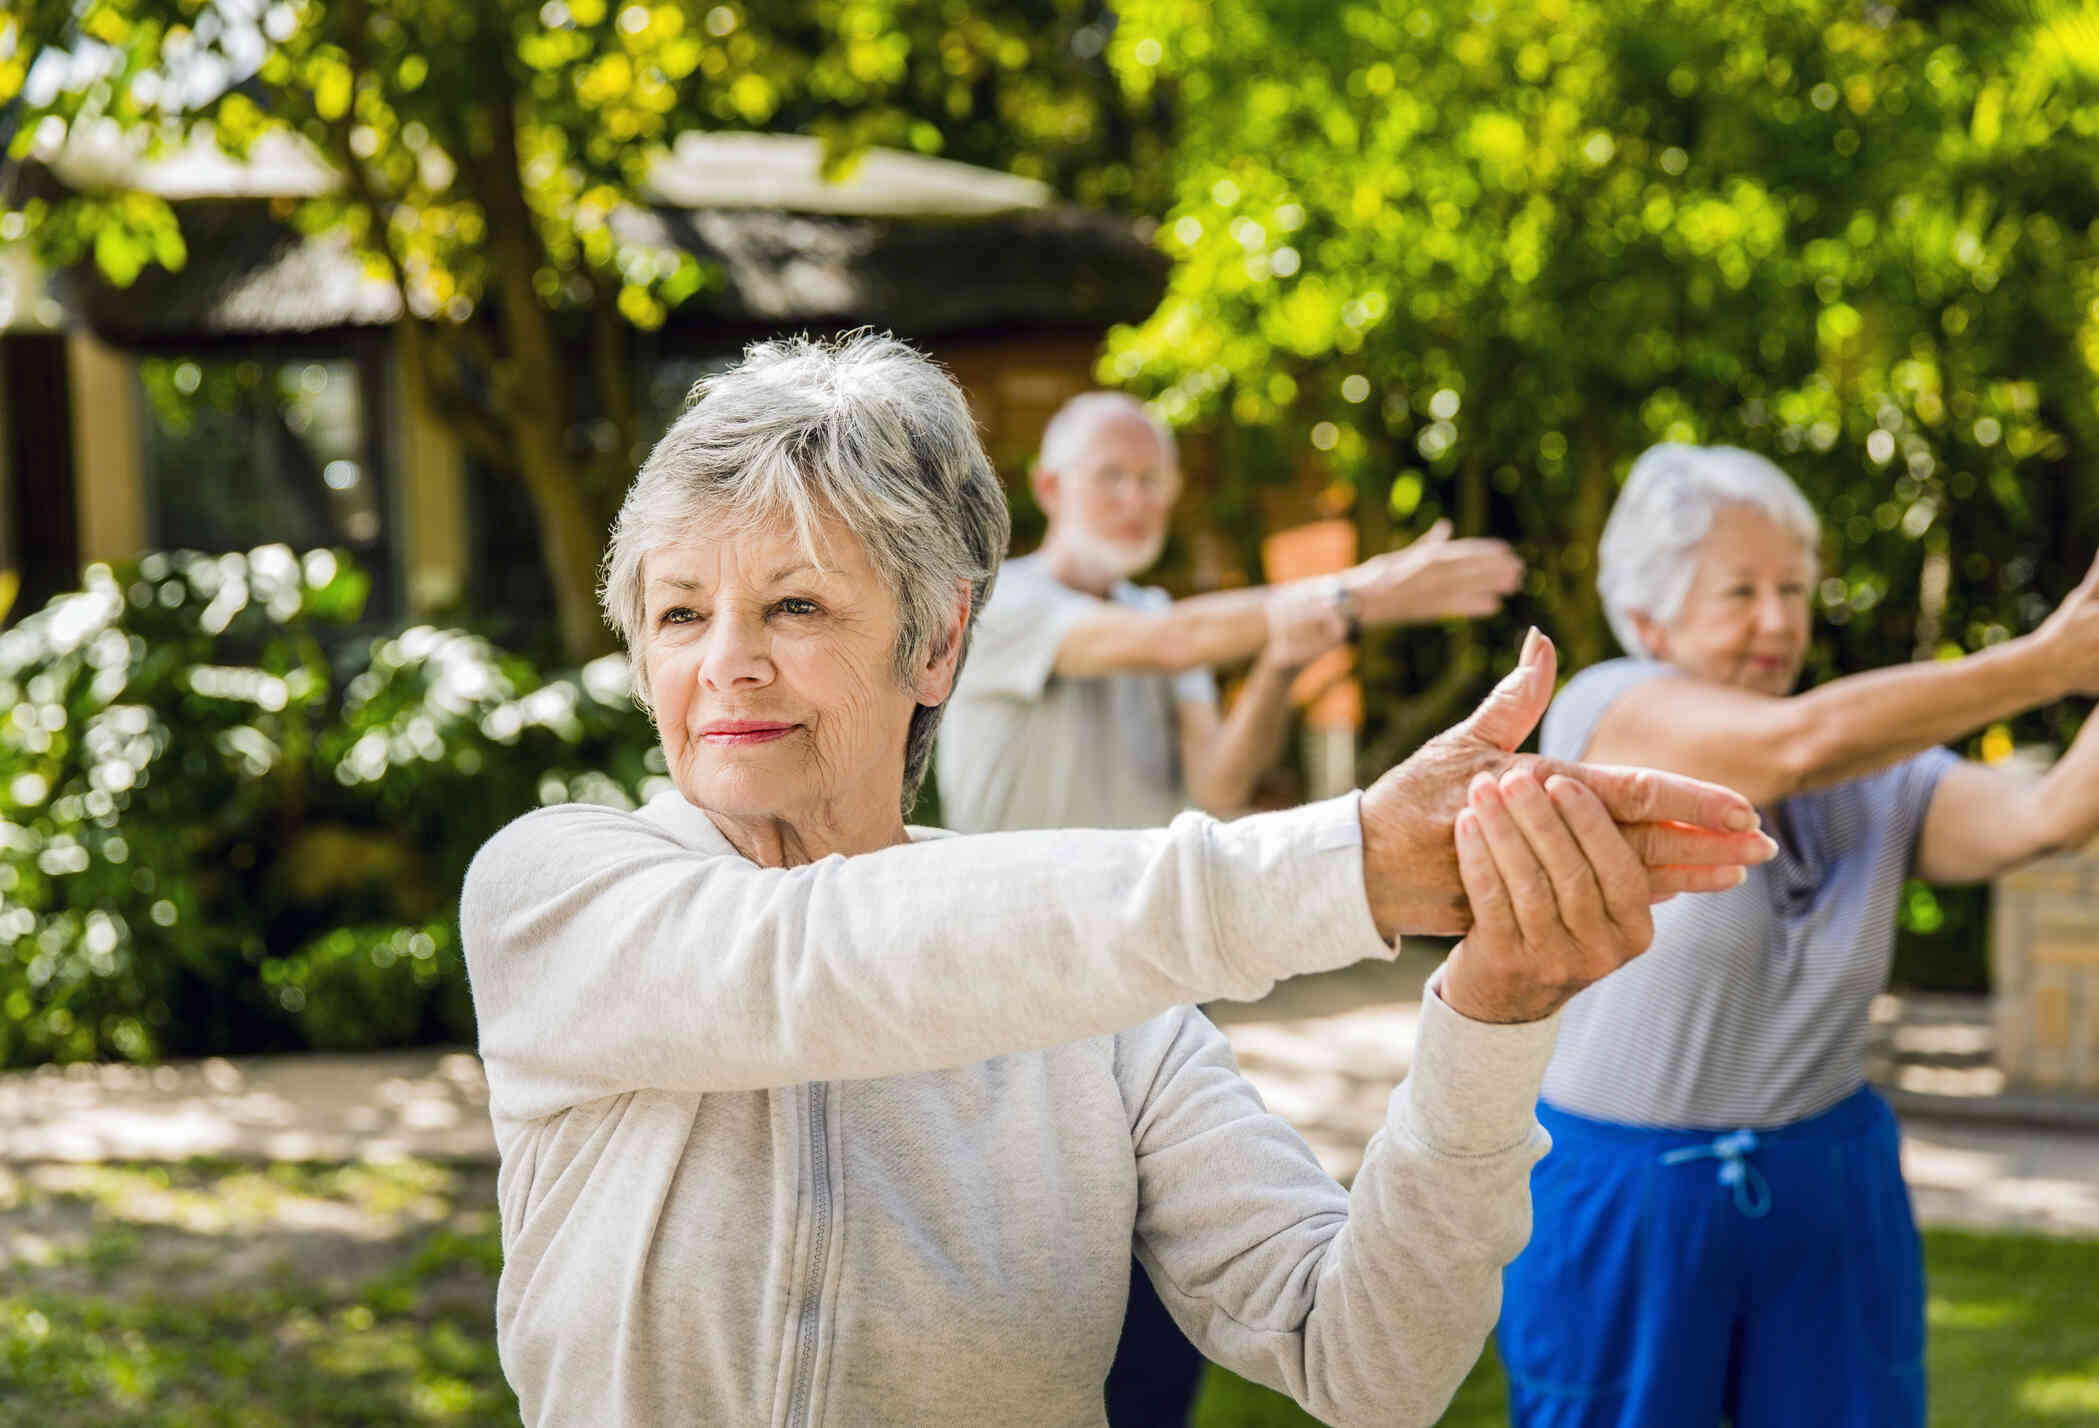 A group of elderly adults stand together outside on a sunny day and stretch during an exercise class.